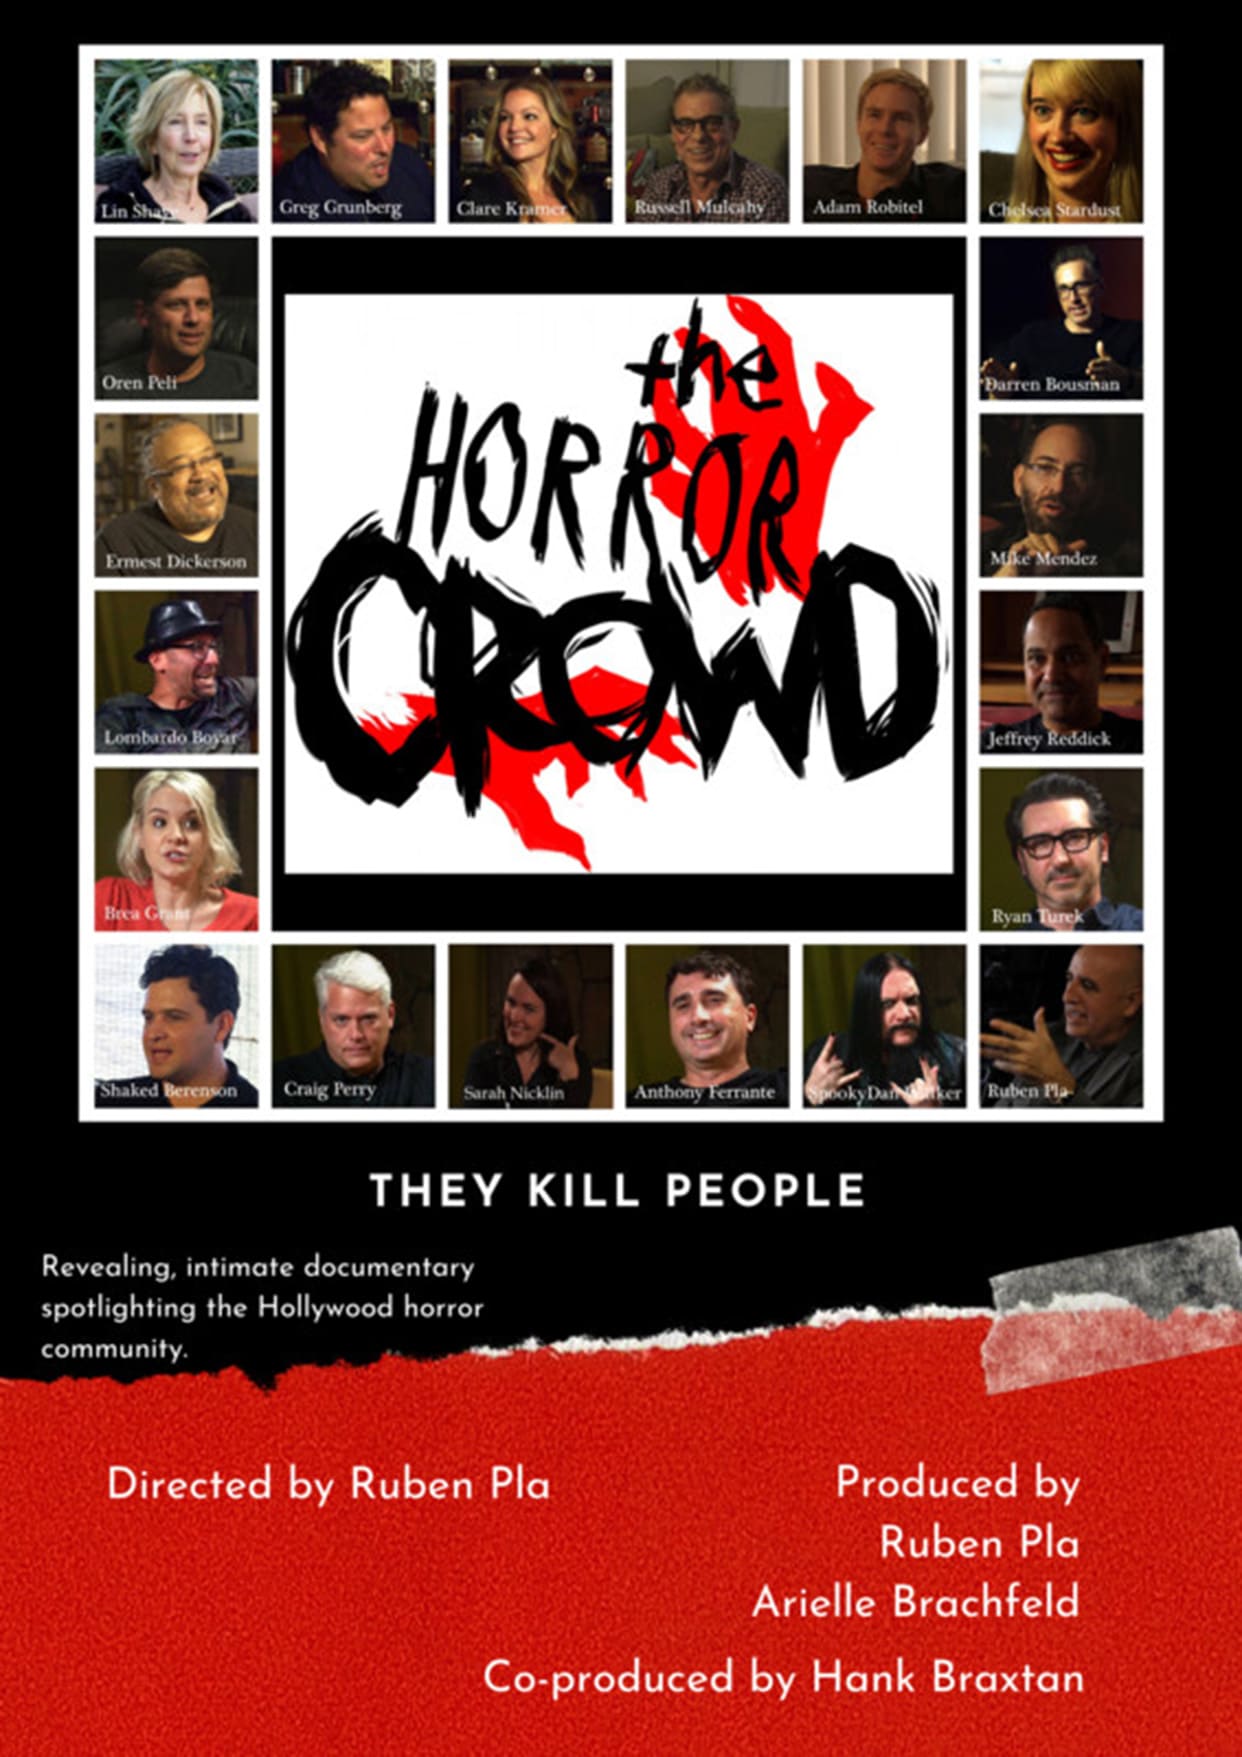 THE HORROR CROWD